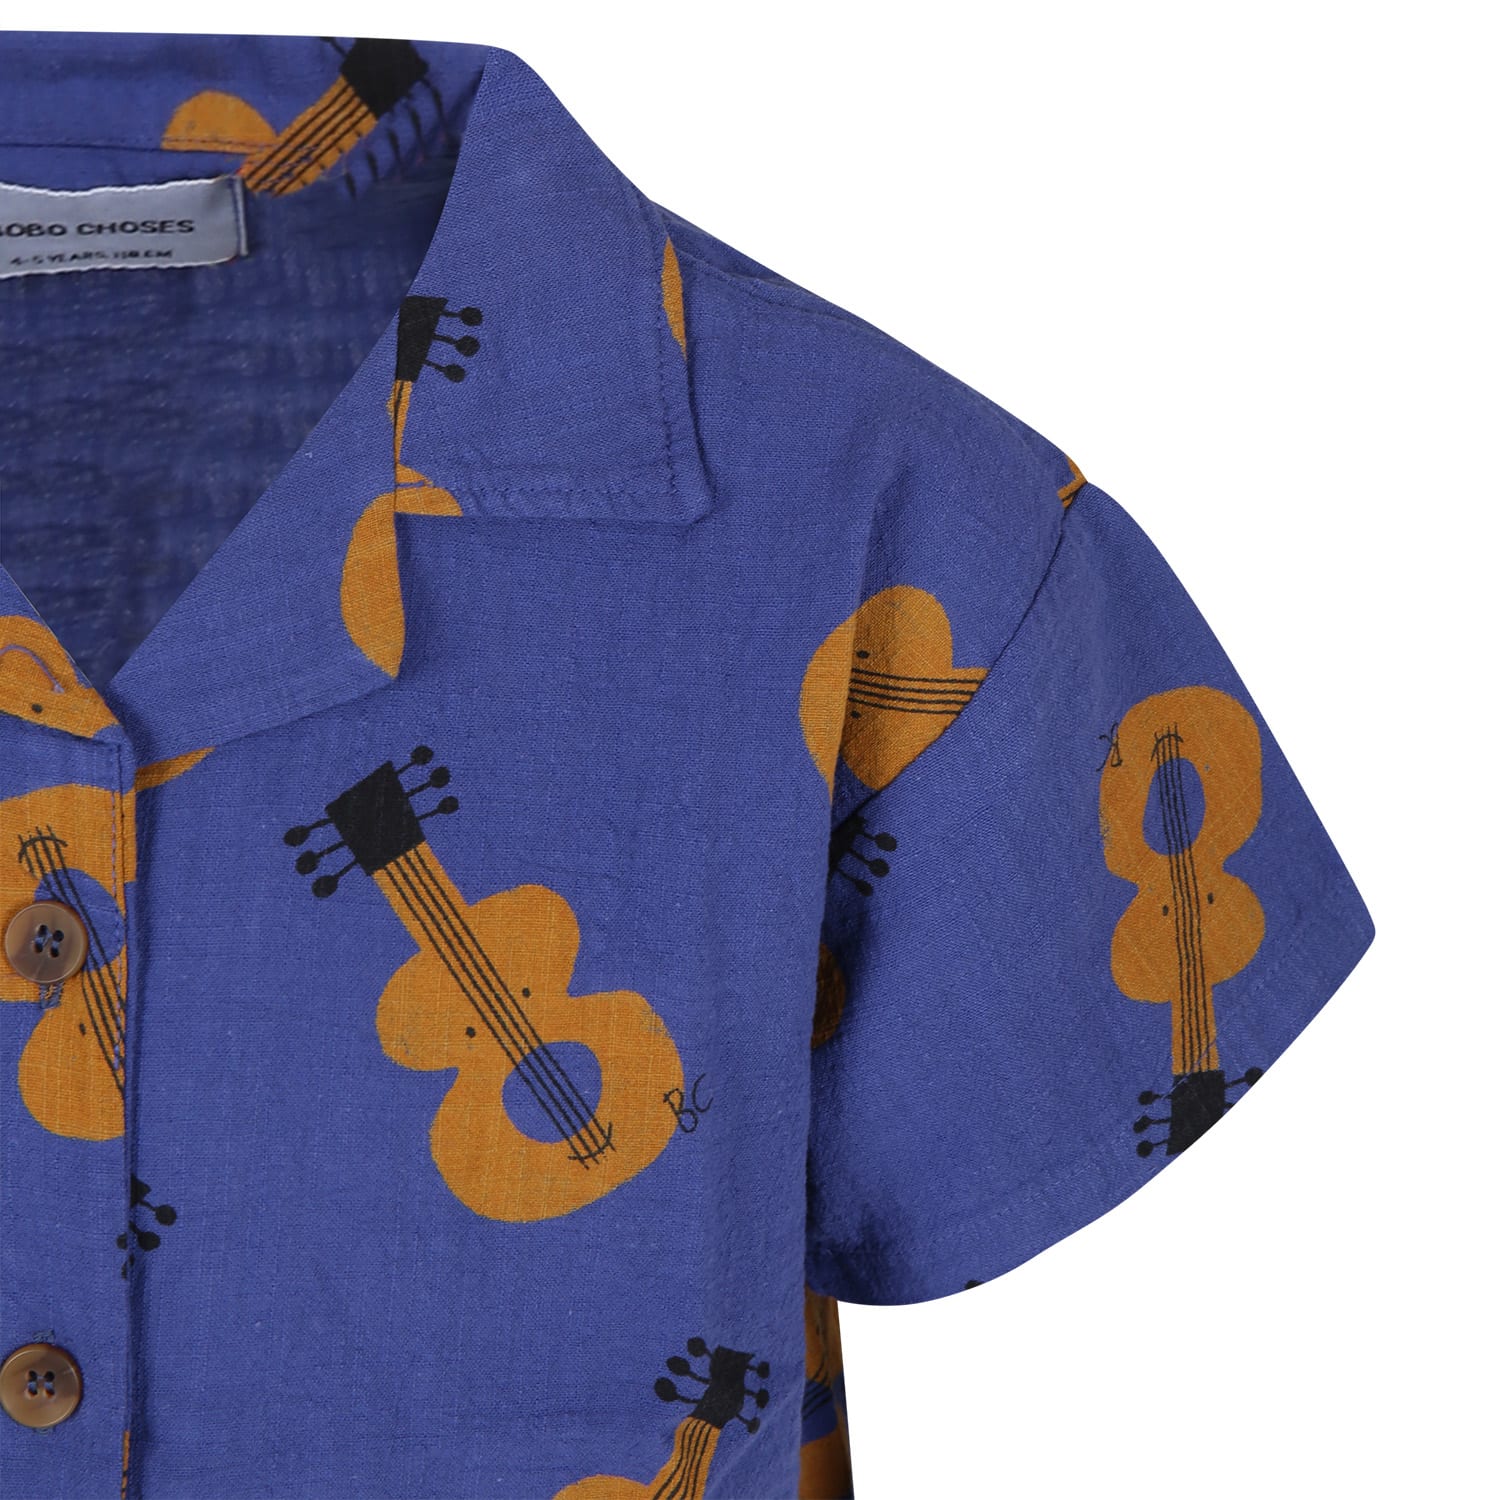 Shop Bobo Choses Blue Shirt For Kids With All-over Guitars